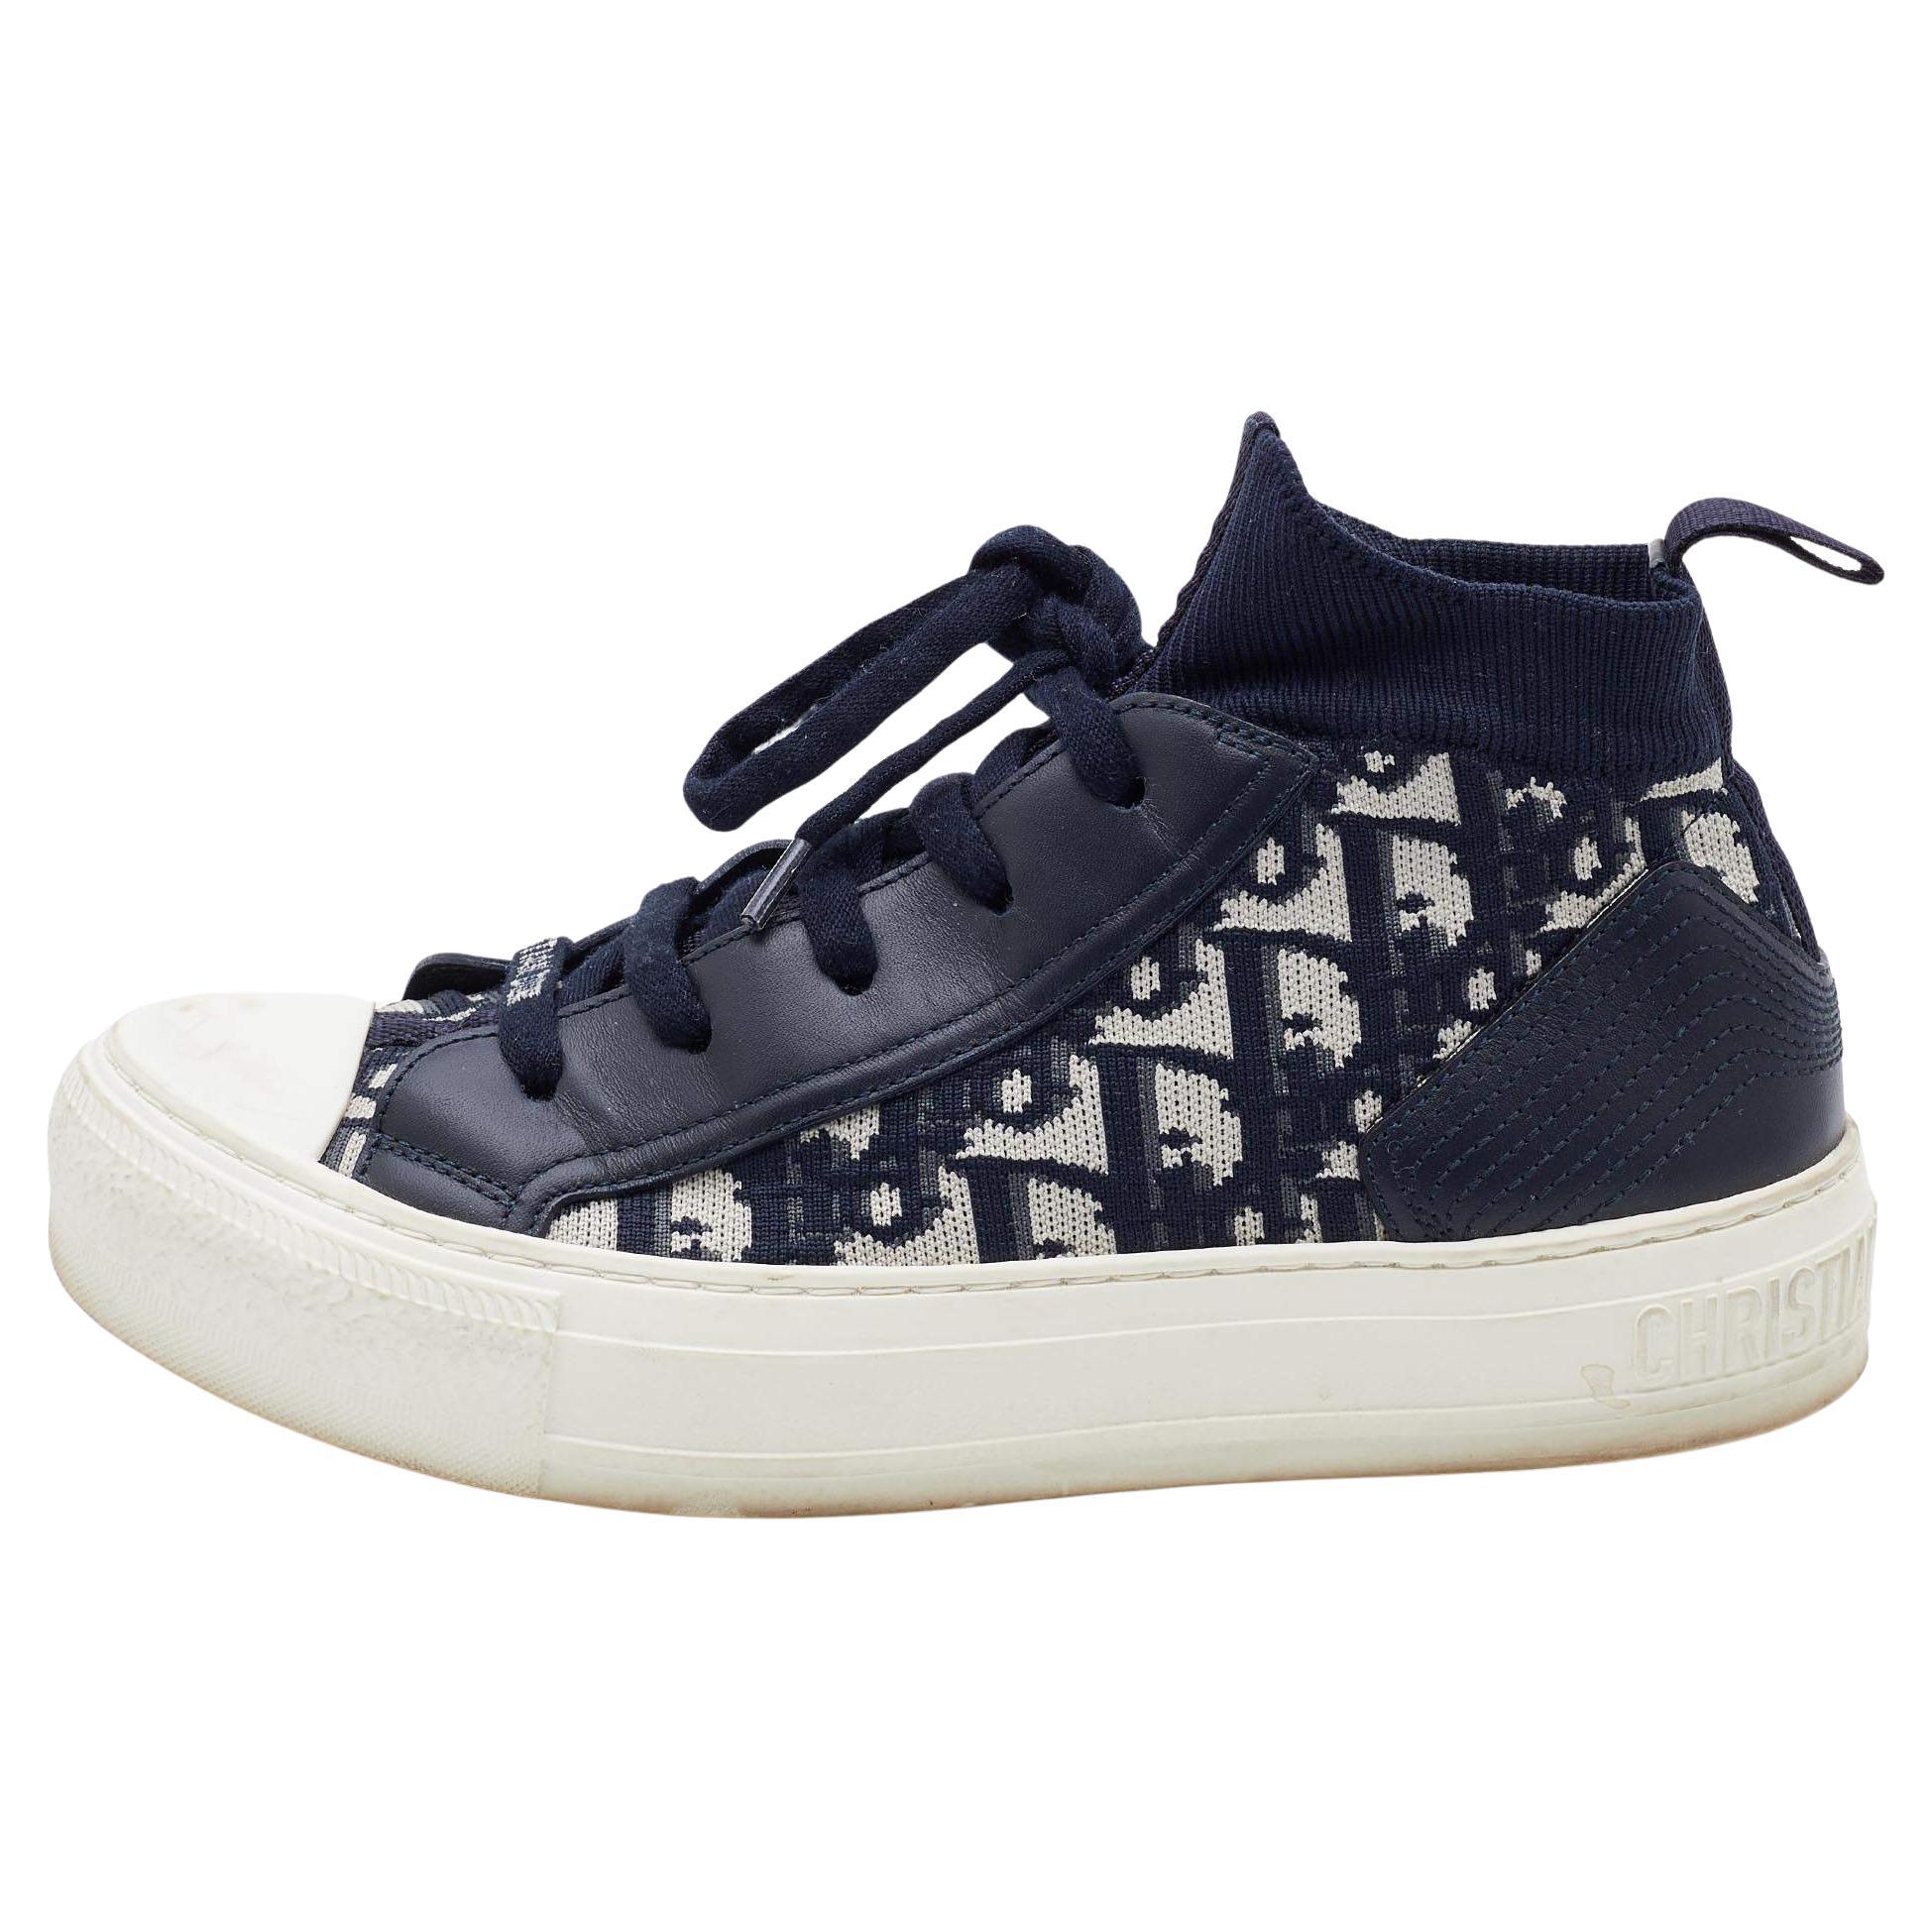 Dior Blue Knit Fabric and Leather Walk'n'Dior High Top Sneakers Size 35.5